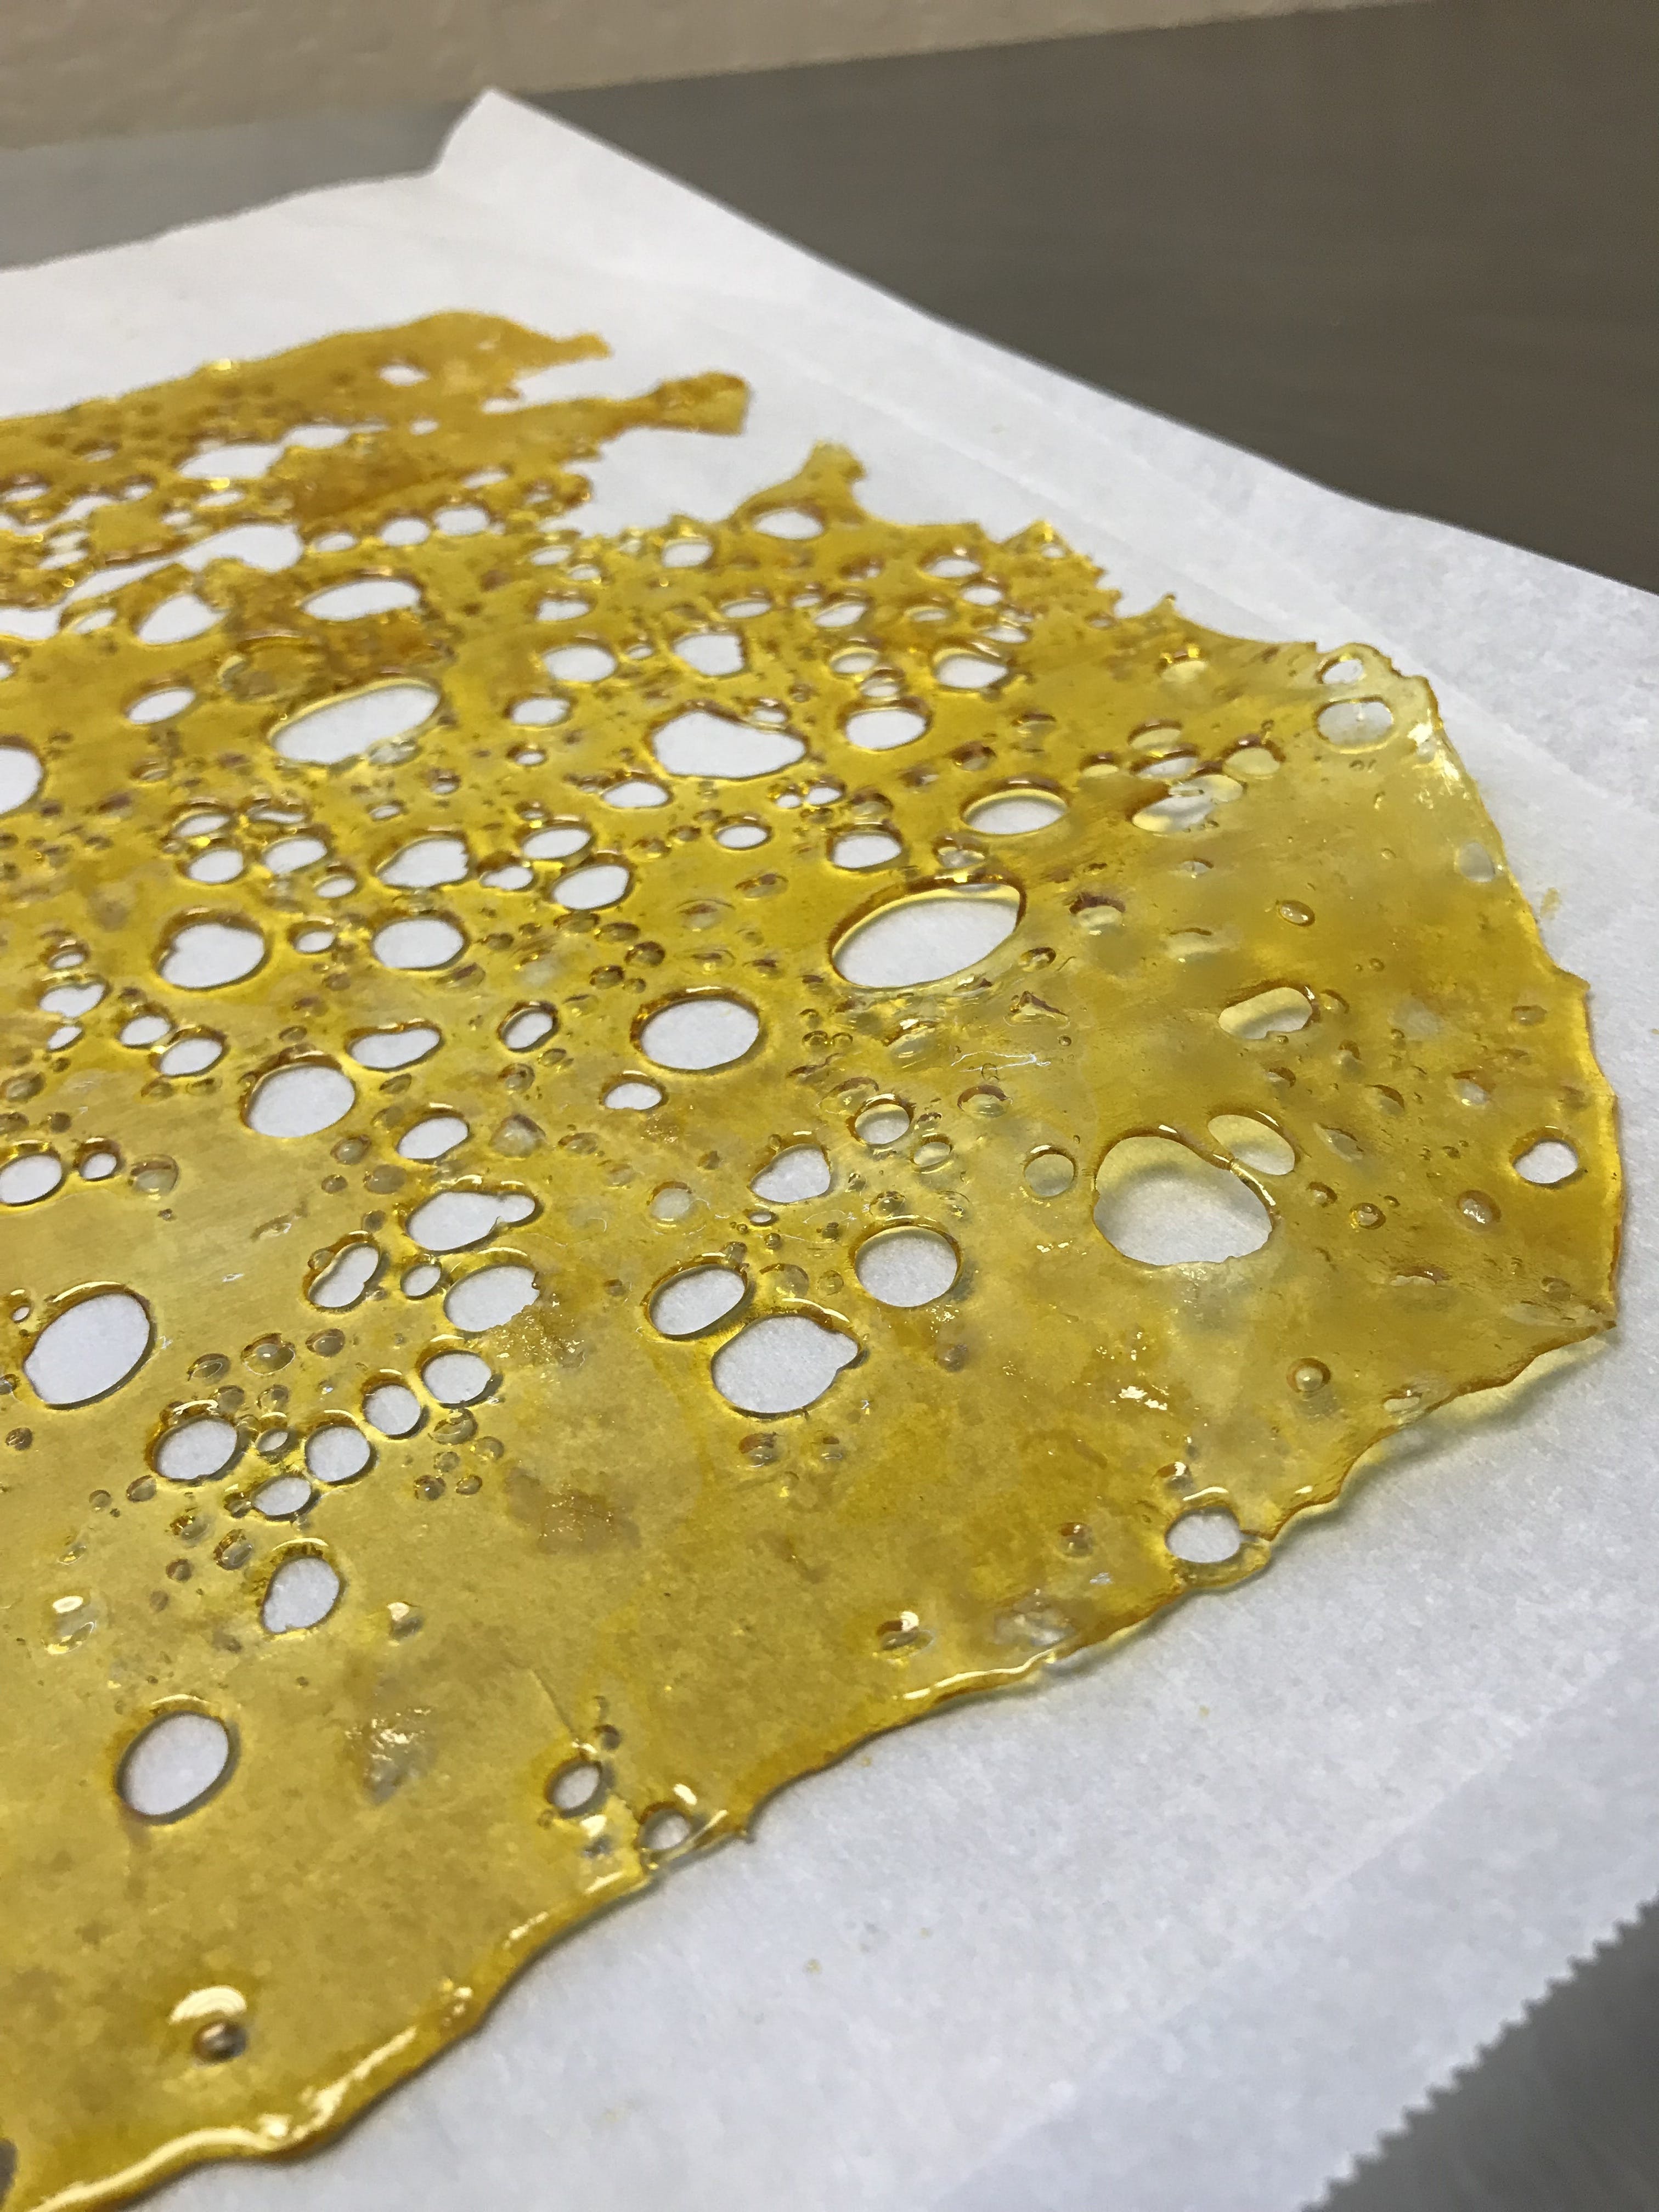 wax-sweet-science-live-resin-shatter-huckleberry